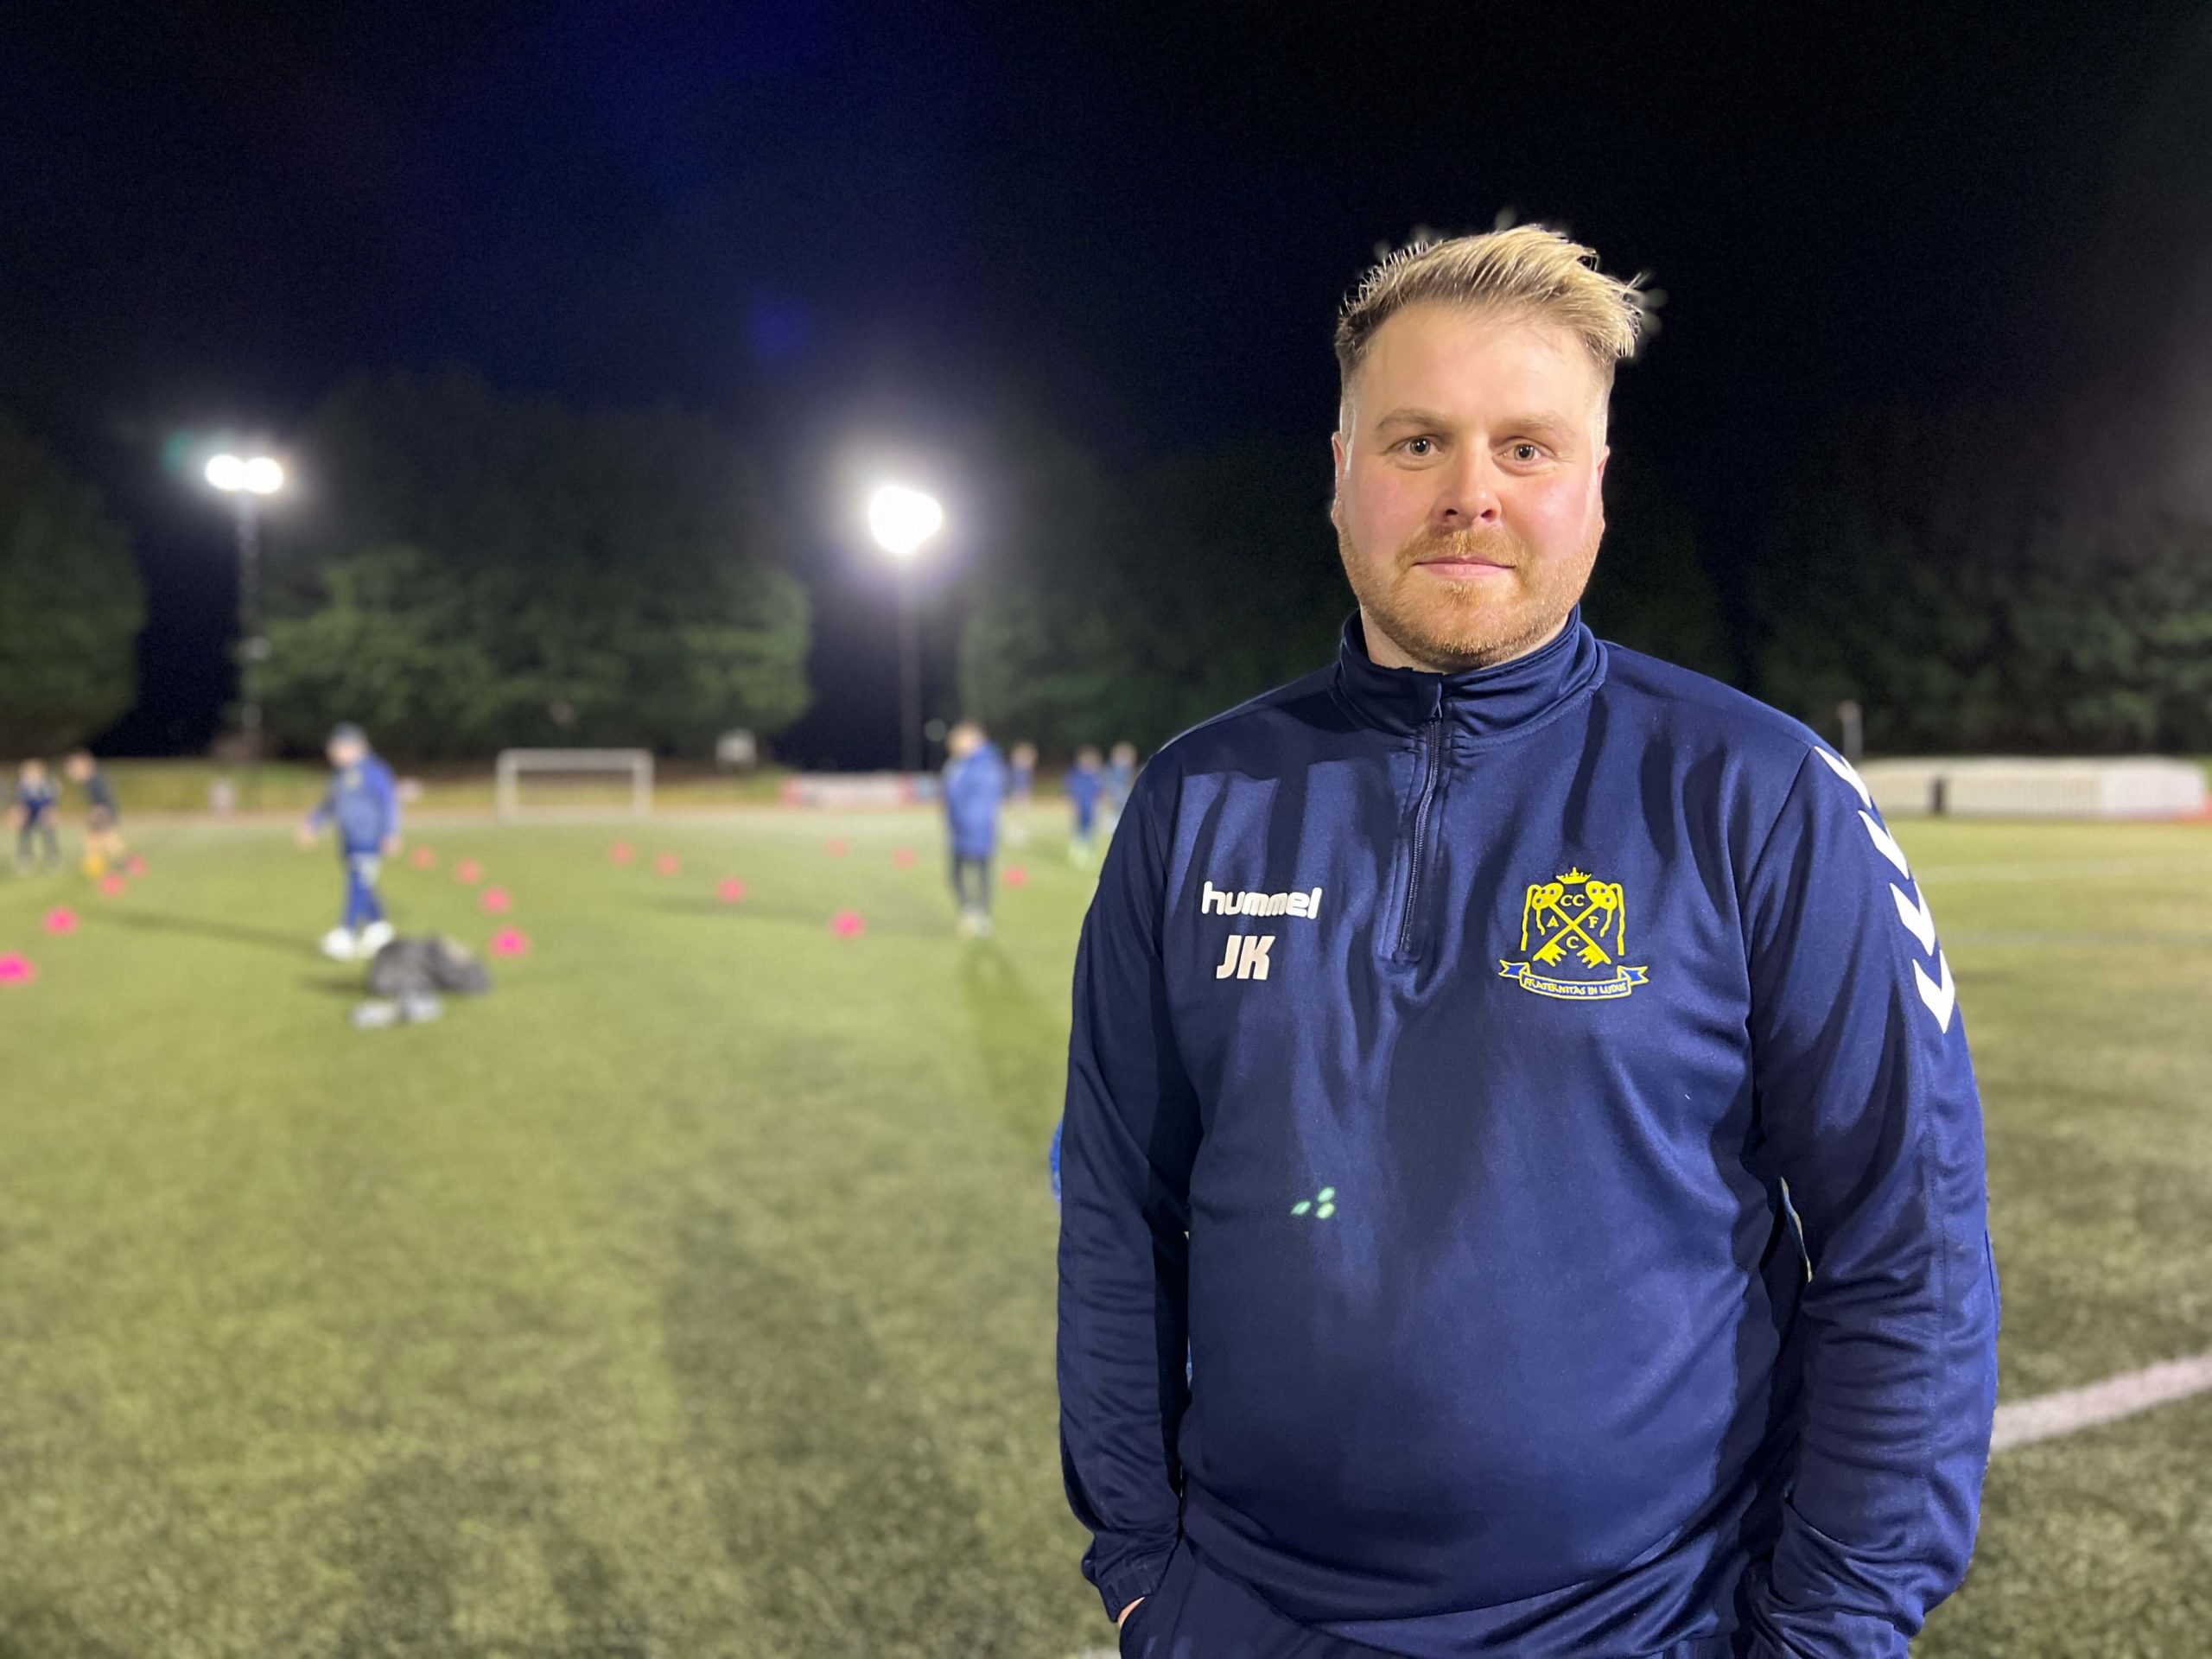 James Kinsella, manager of Cwmbran Celtic FC, on the pitch